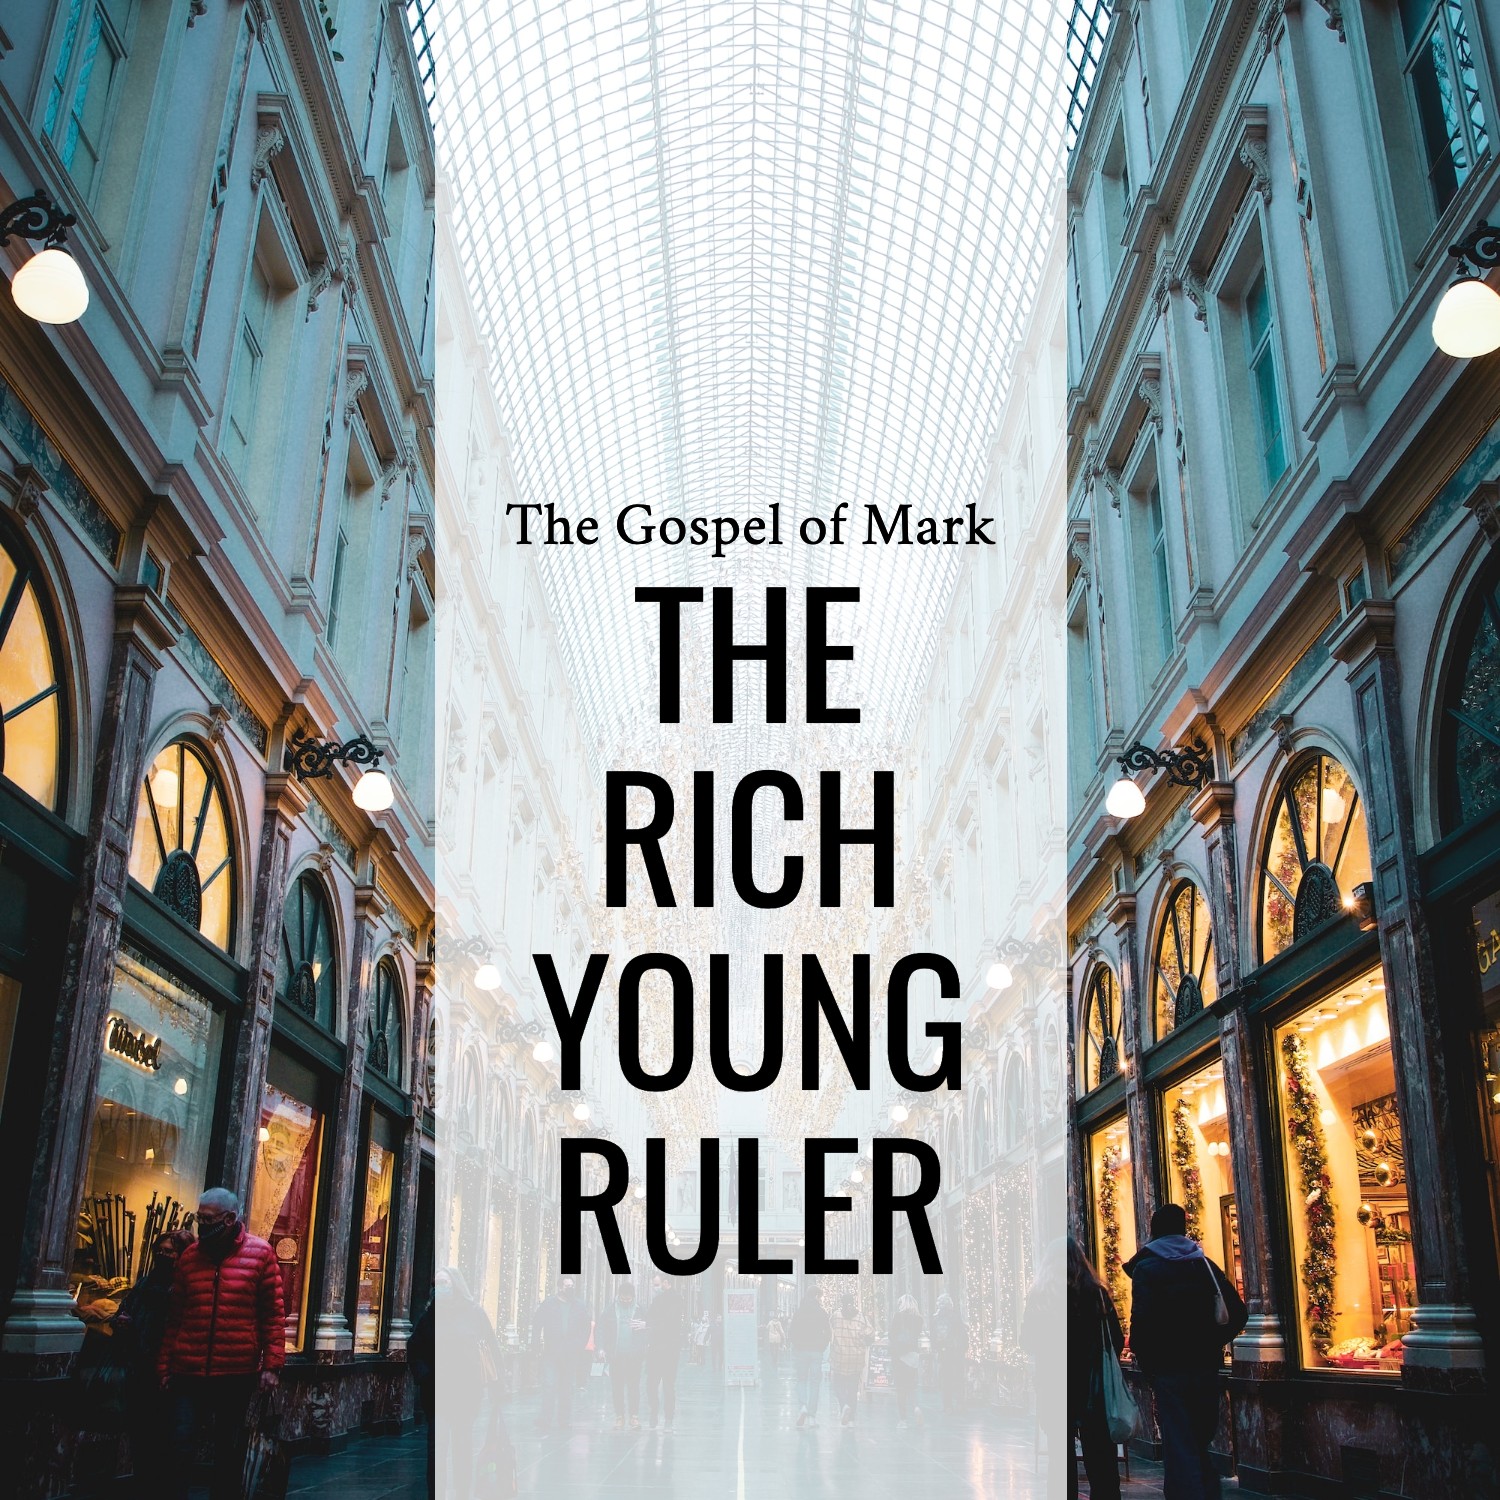 Ep 169 - Mark 10:17-31 | The Rich Young Ruler  | Aaron Ventura